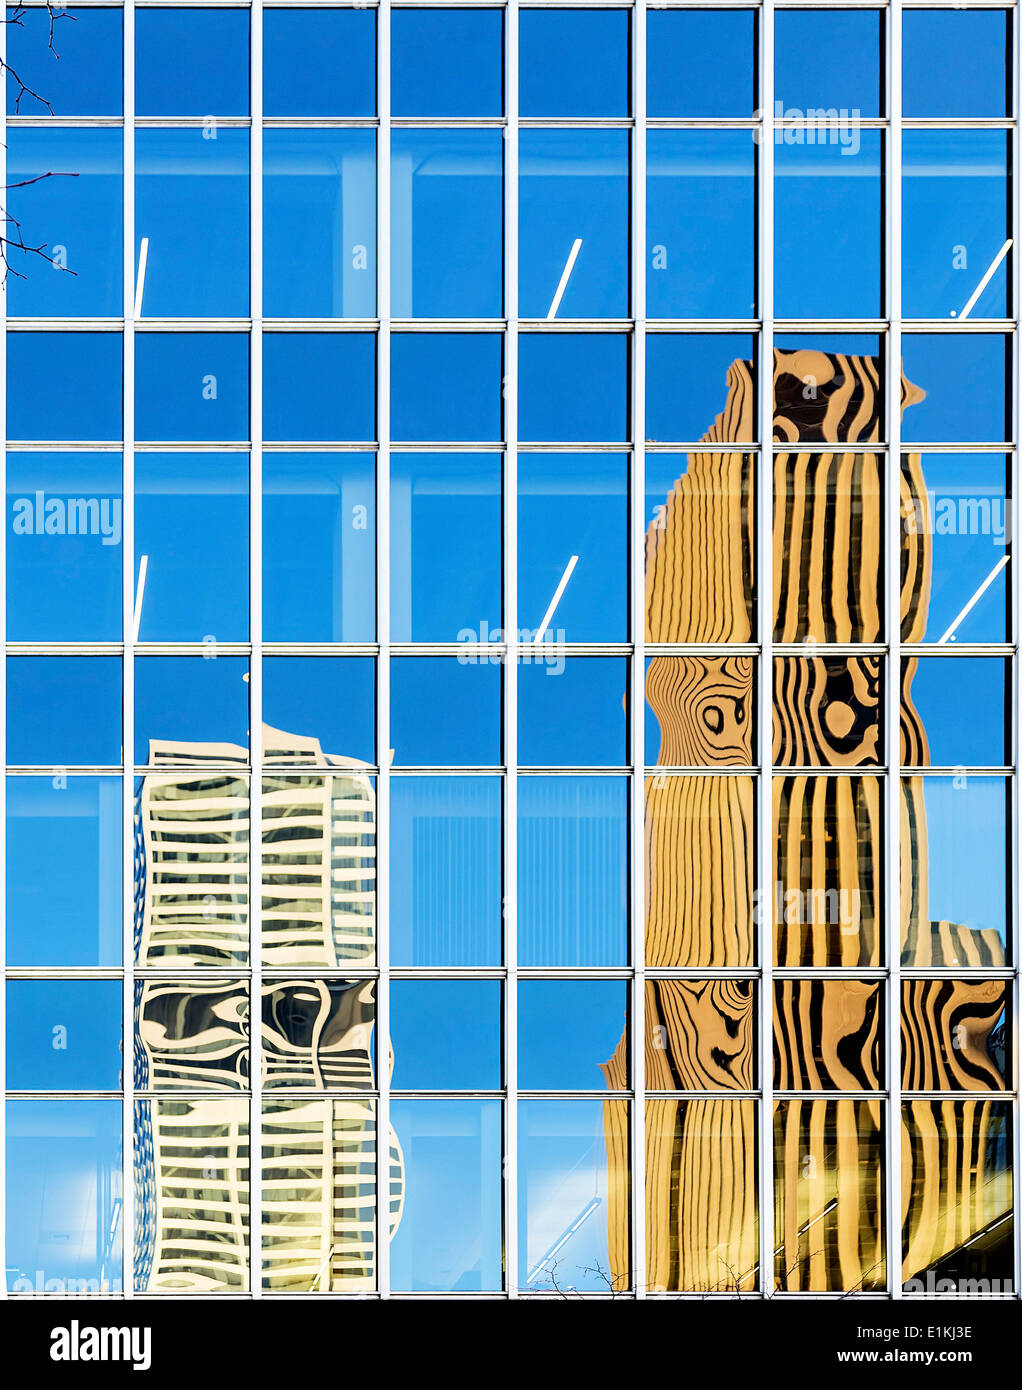 Modern buildings reflected in the glass exterior of an office building. Stock Photo